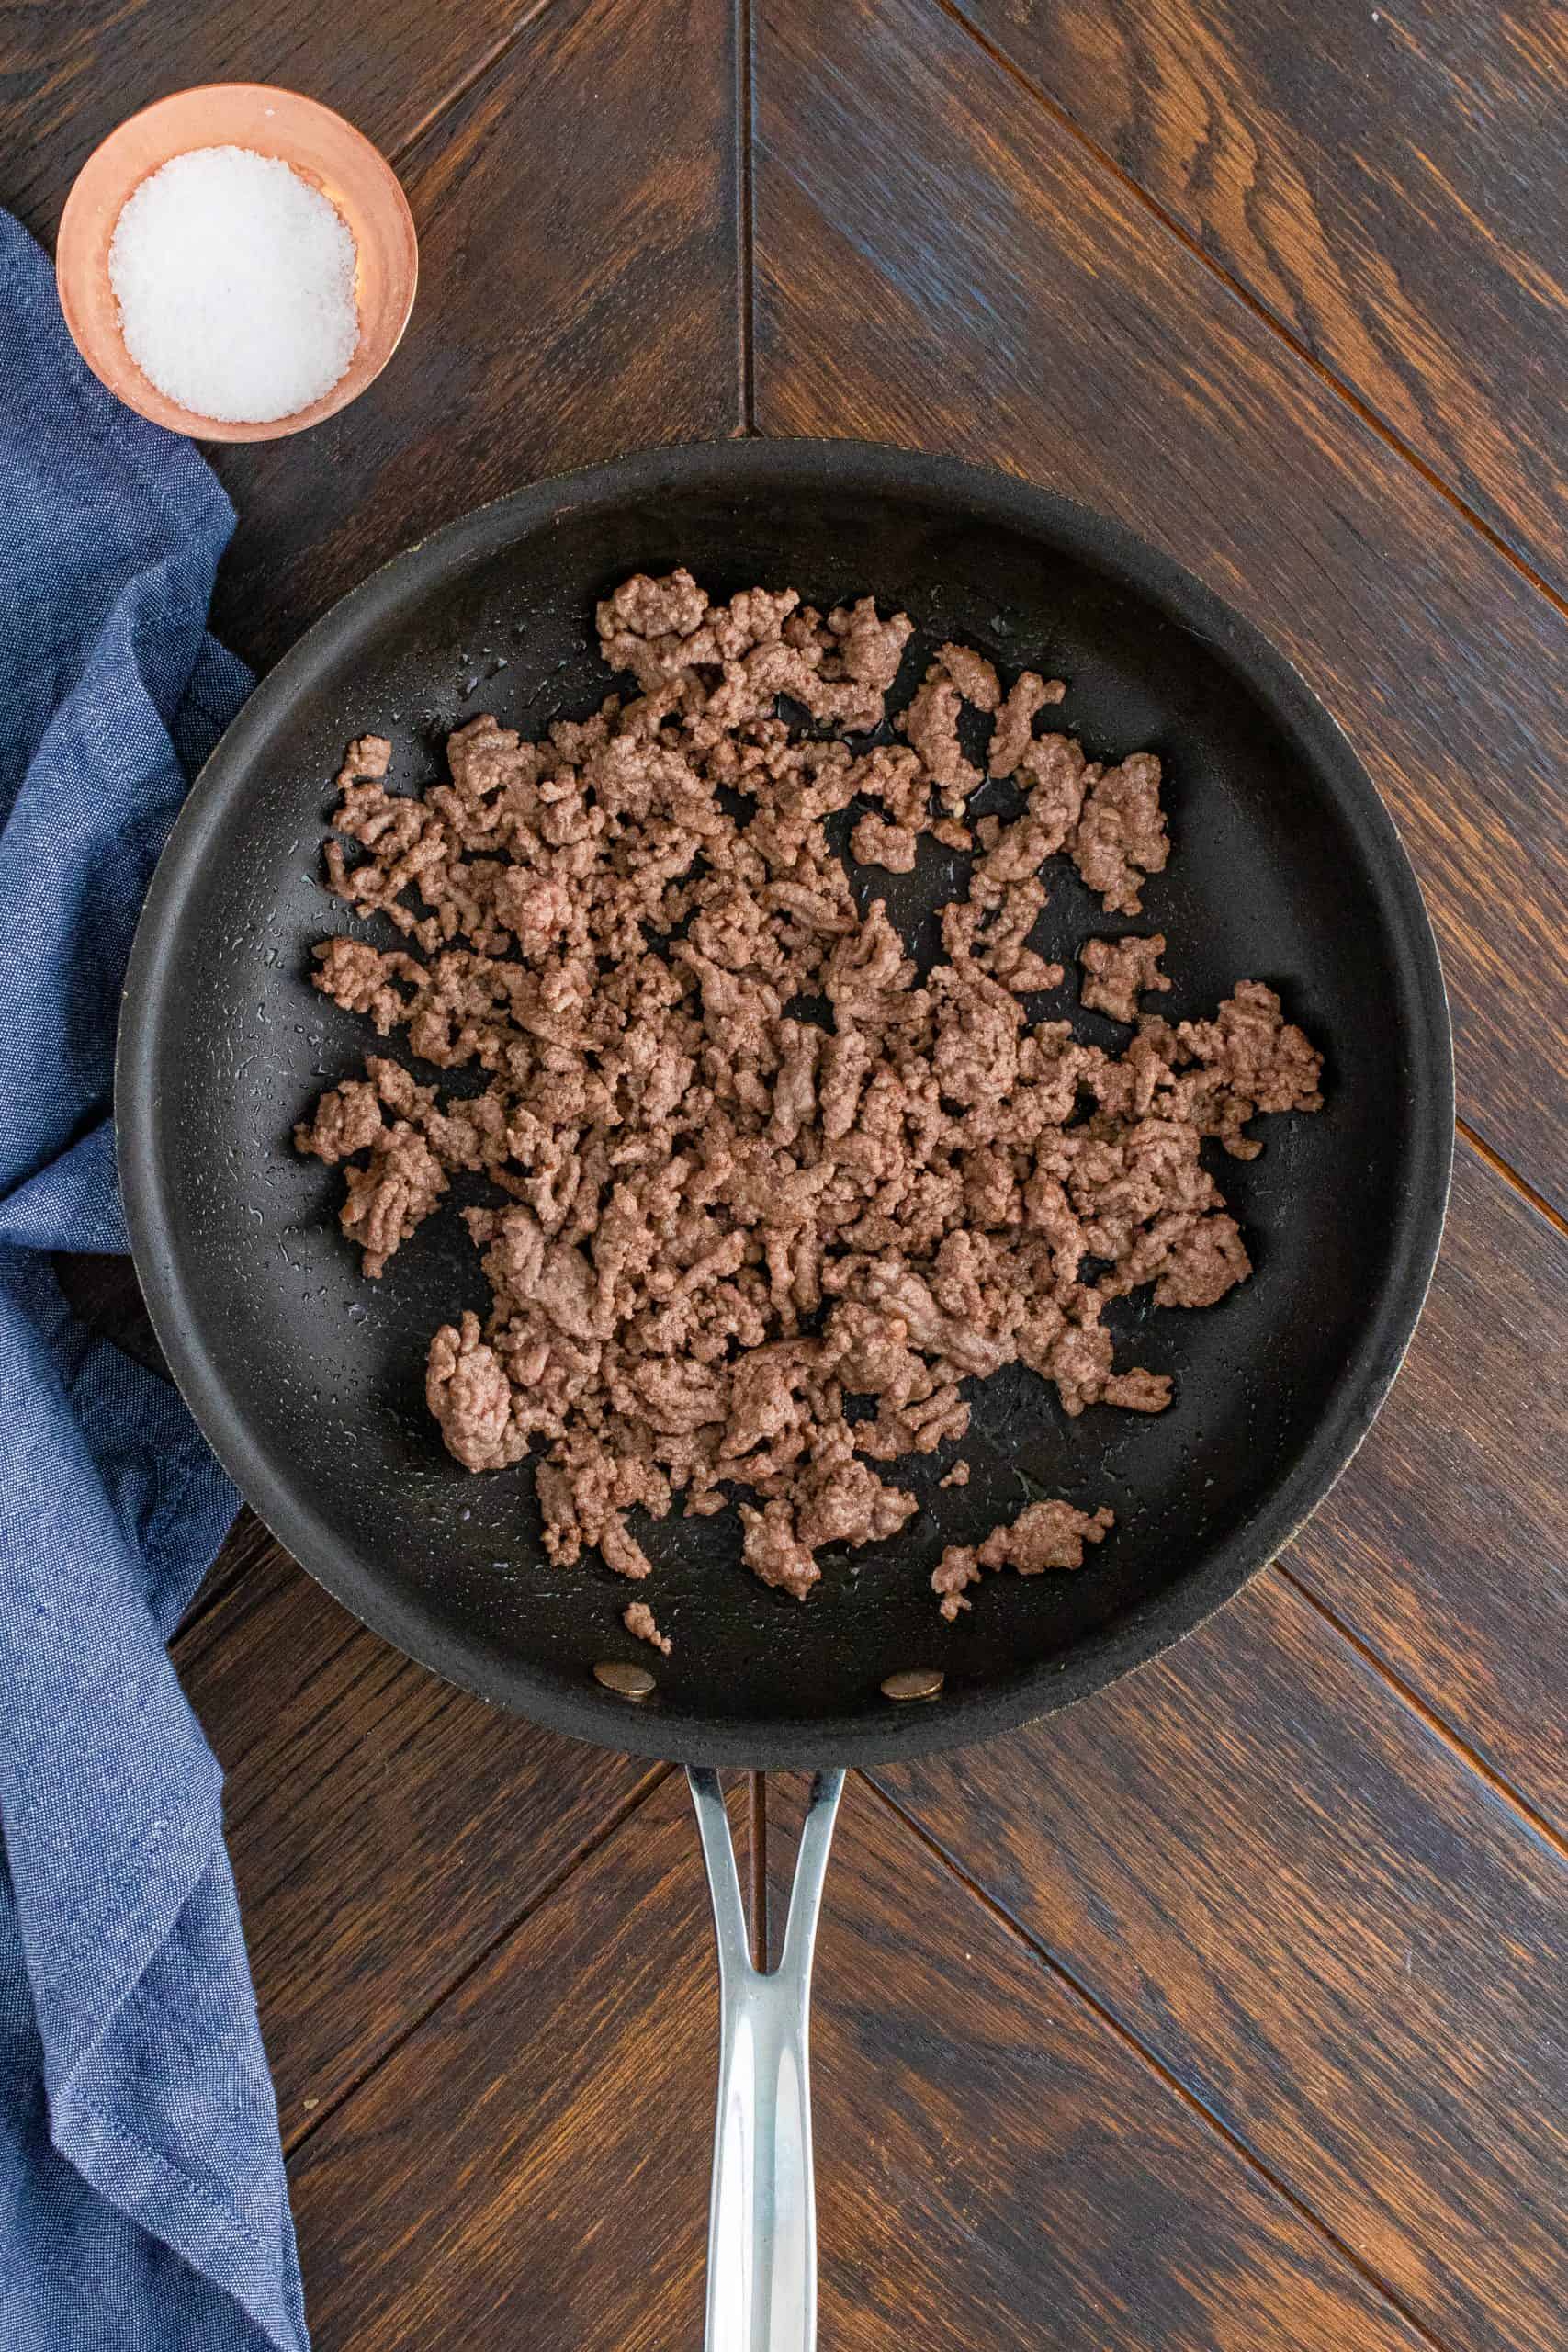 Cooked ground beef in pan with blue linen on the side of the pan.